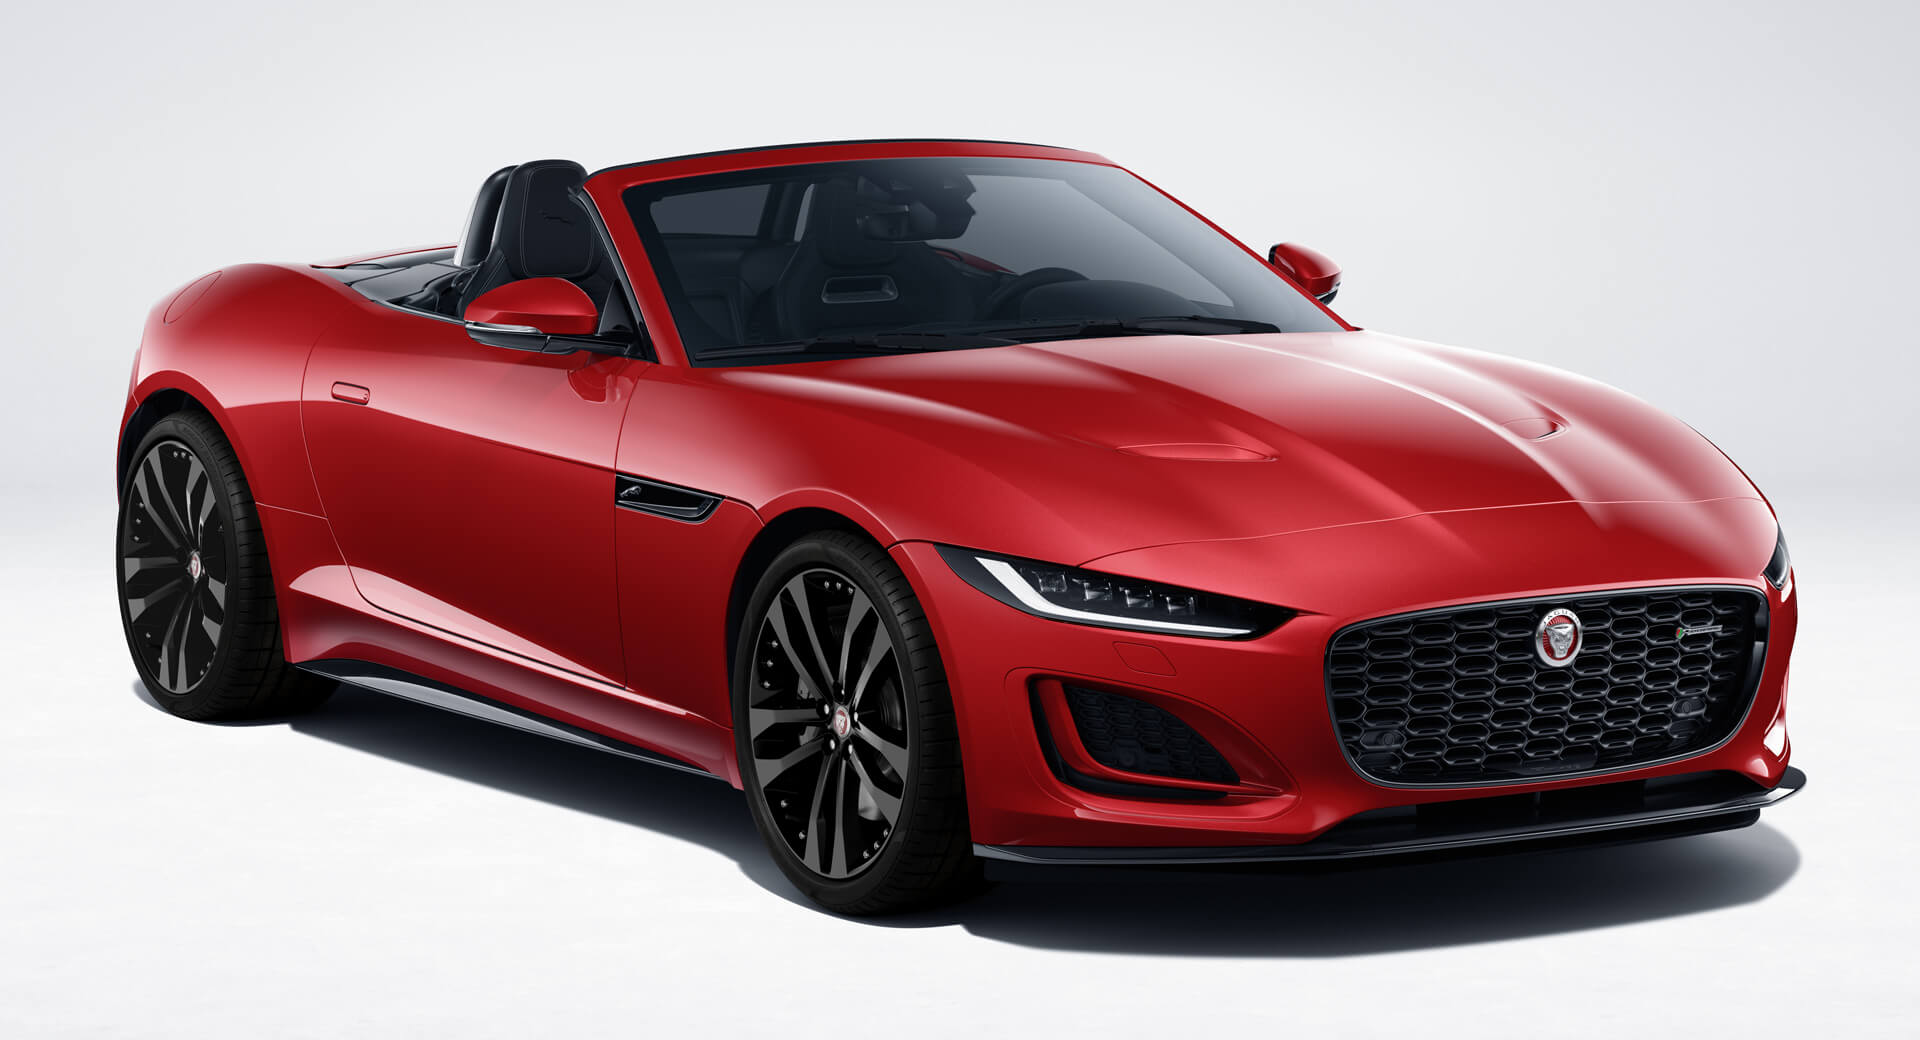 2021 Jaguar F-Type Black Launched The UK In Coupe And Convertible Guise | Carscoops